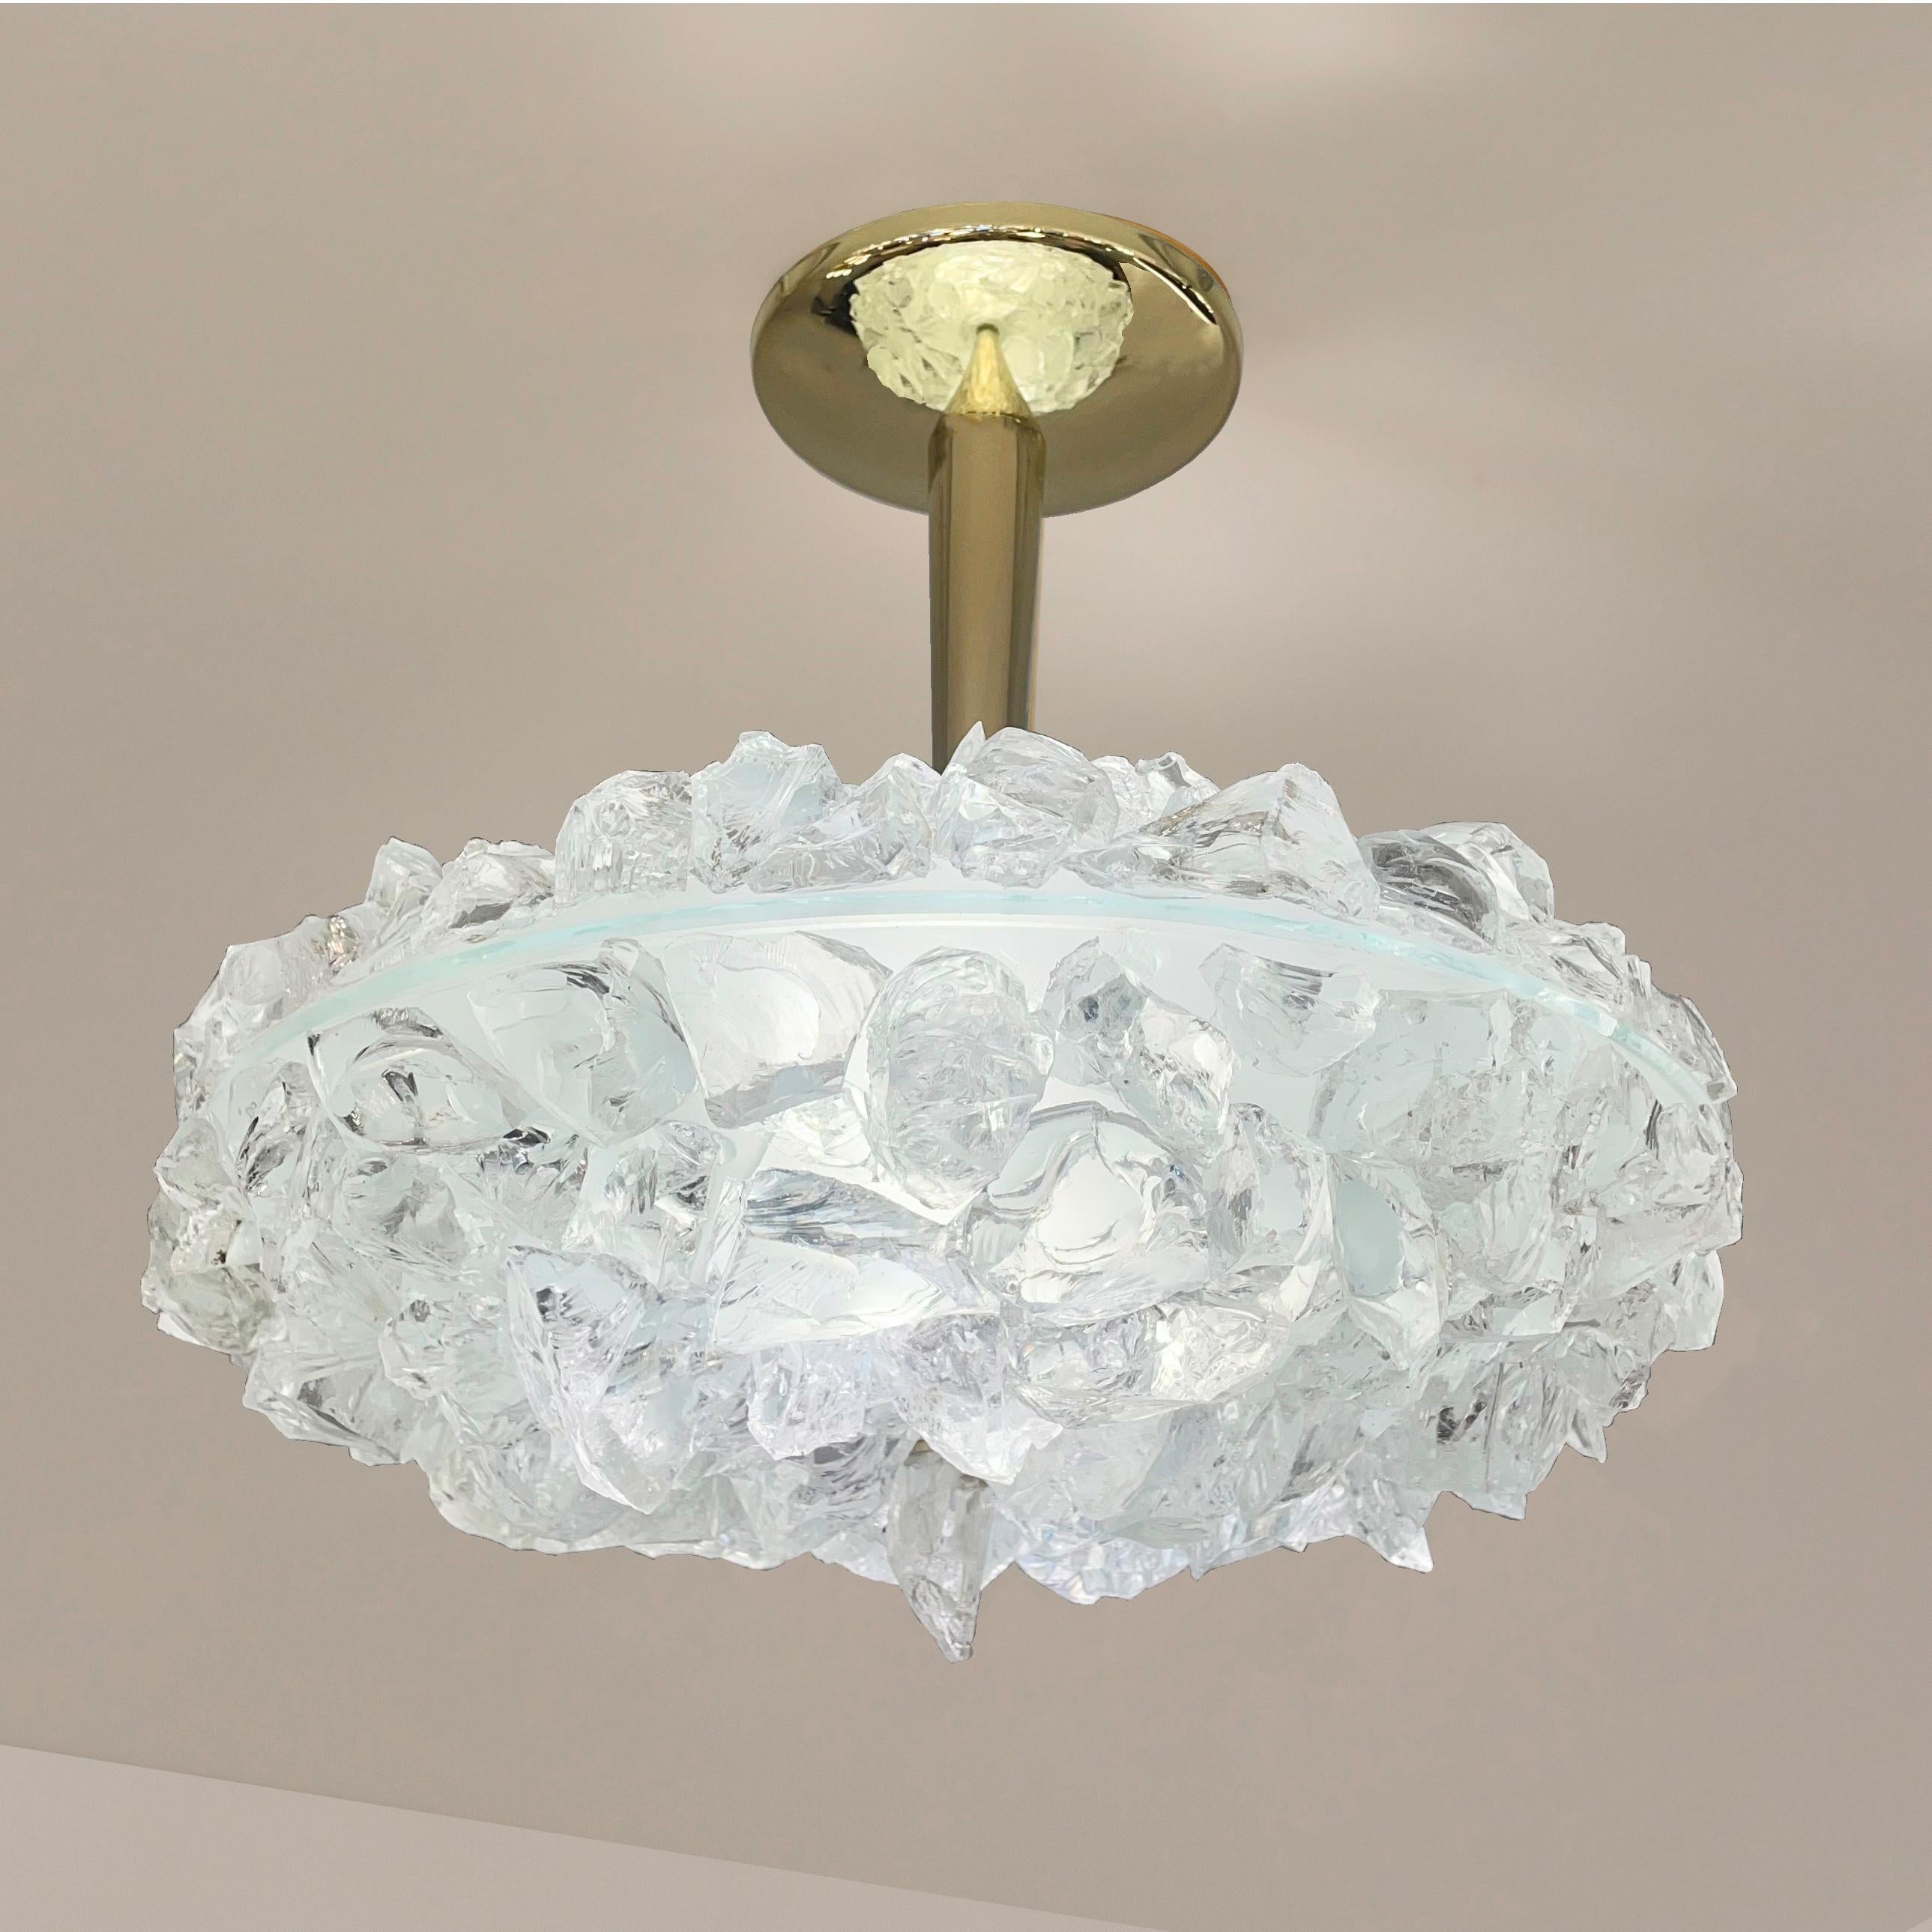 The focal point of the Matera ceiling light is the sculptural glass shade composed of dozens of hand applied crystal elements. Its clean and modern stem and canopy, create a balanced contrast to the organic feel of the rest of the piece. Shown with